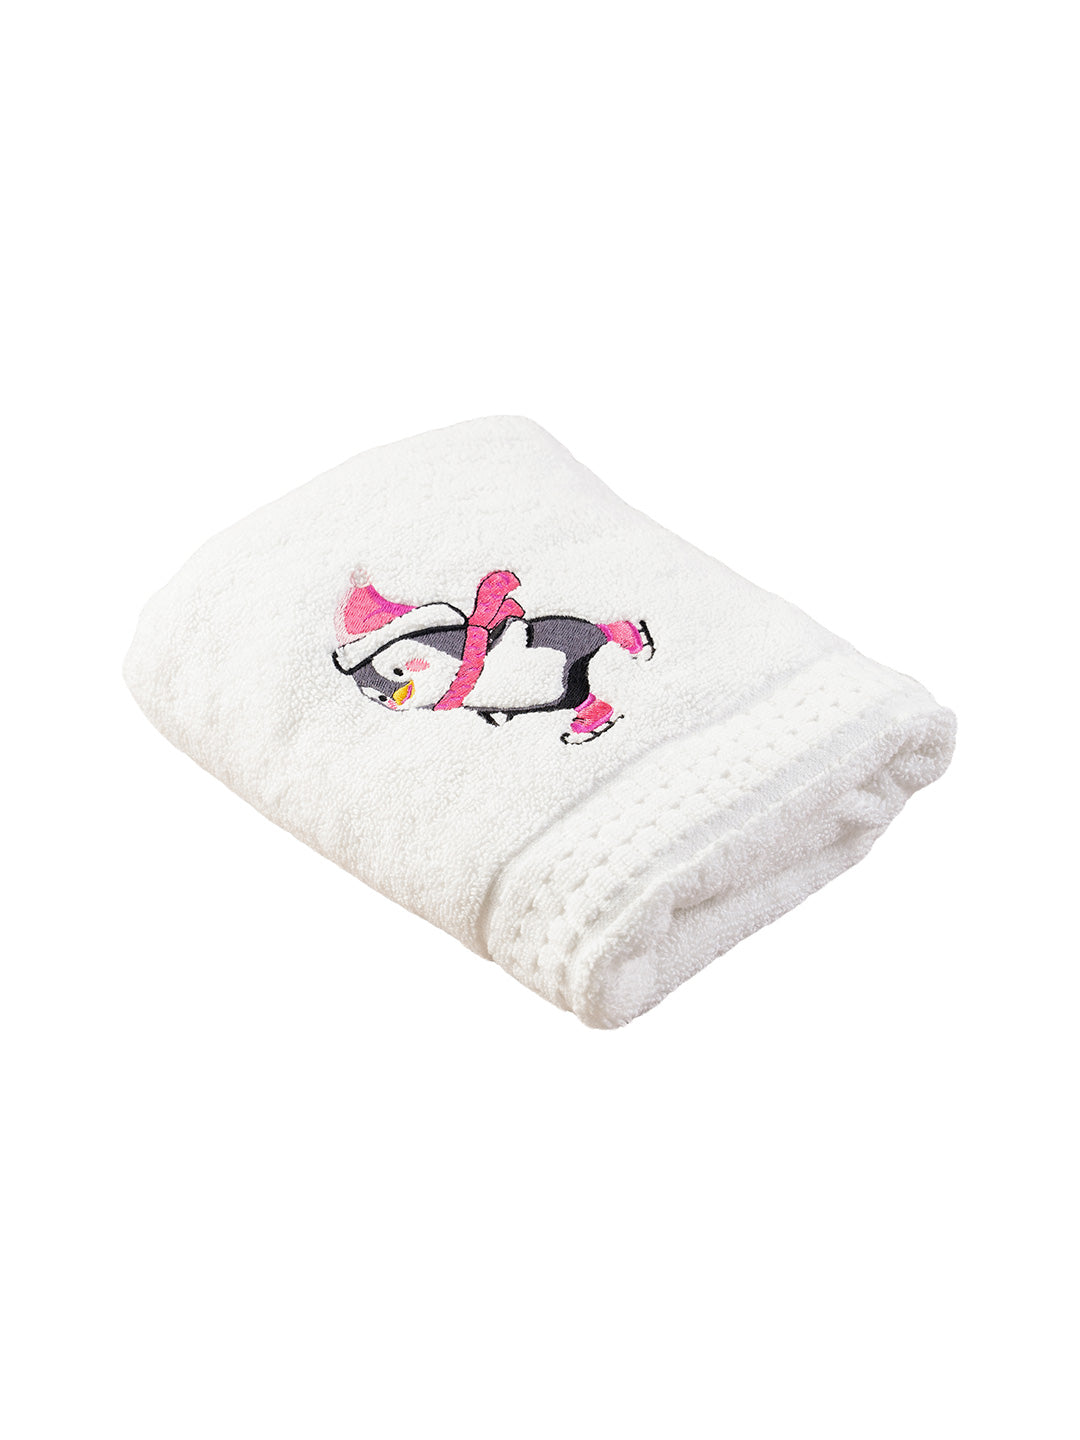 Hand Towels - Pinky Penguin Gift Set